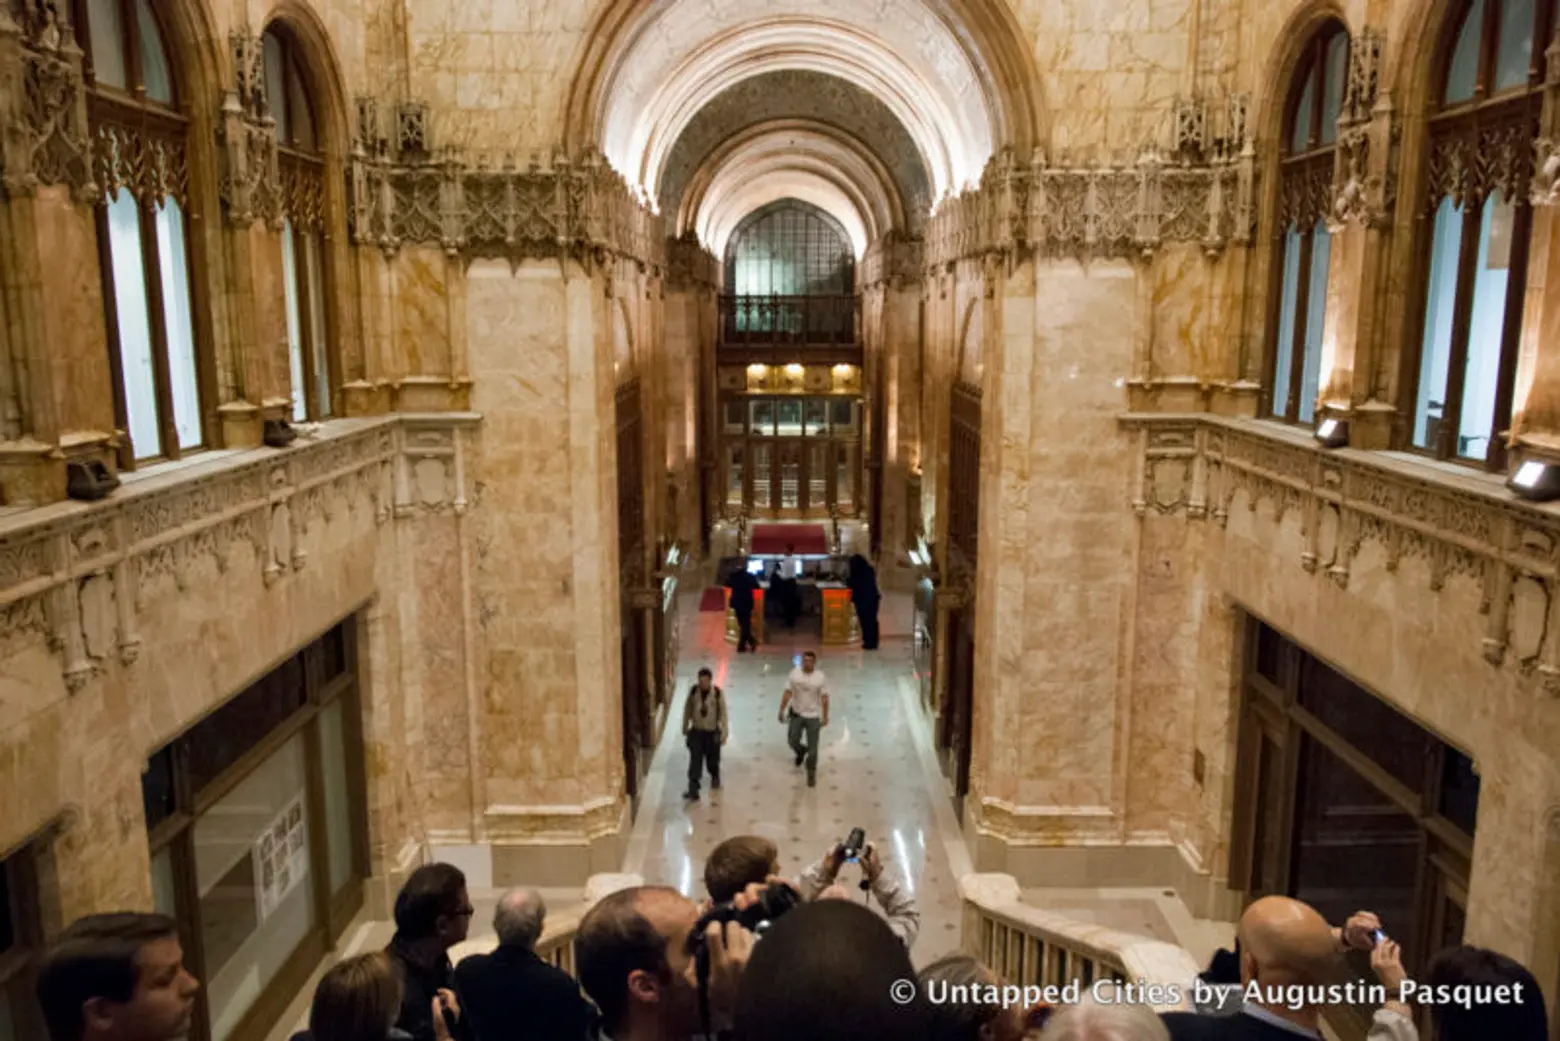 Join Untapped Cities for two insider tours of the Woolworth Building